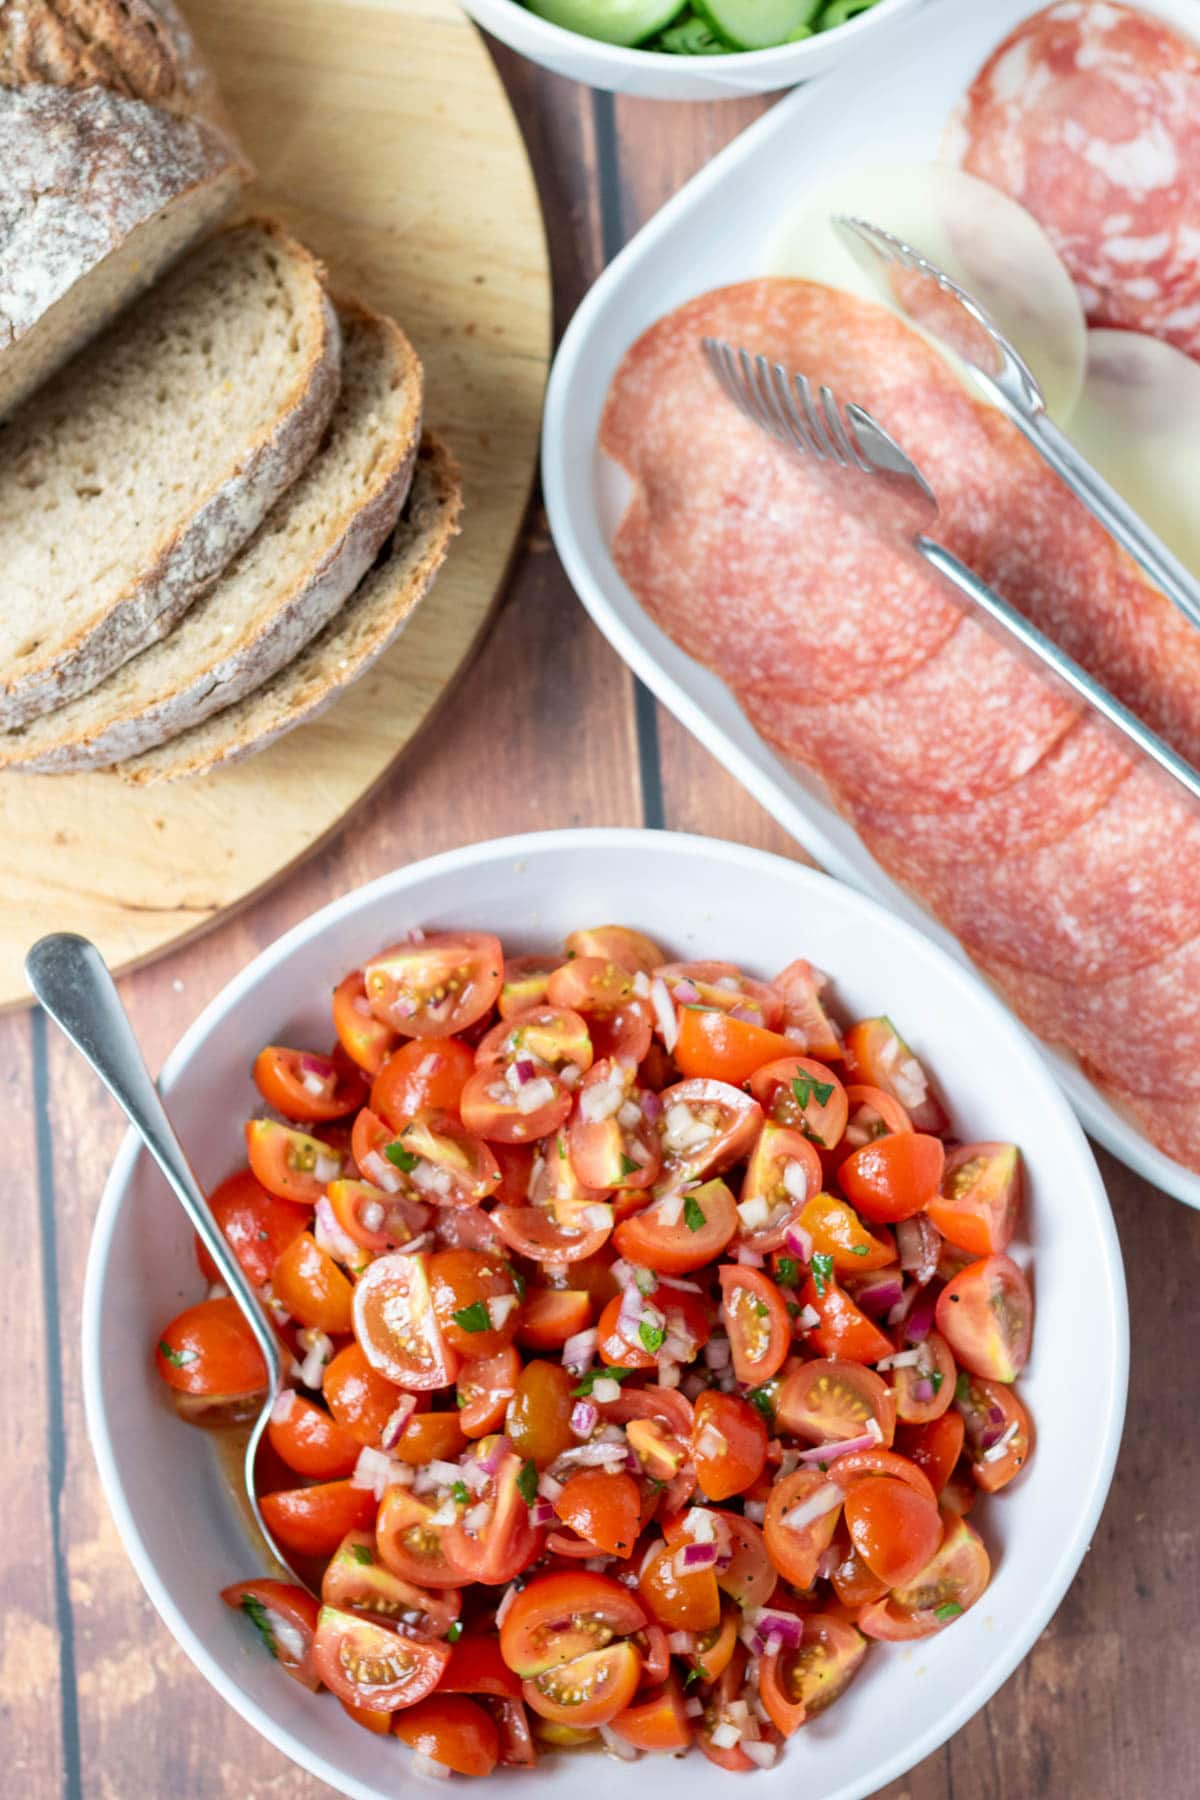 Overhead view of tomato onion salad served in a white bowl with a spoon in, alongside a platter of continental meats and a board of sliced crusty bread.